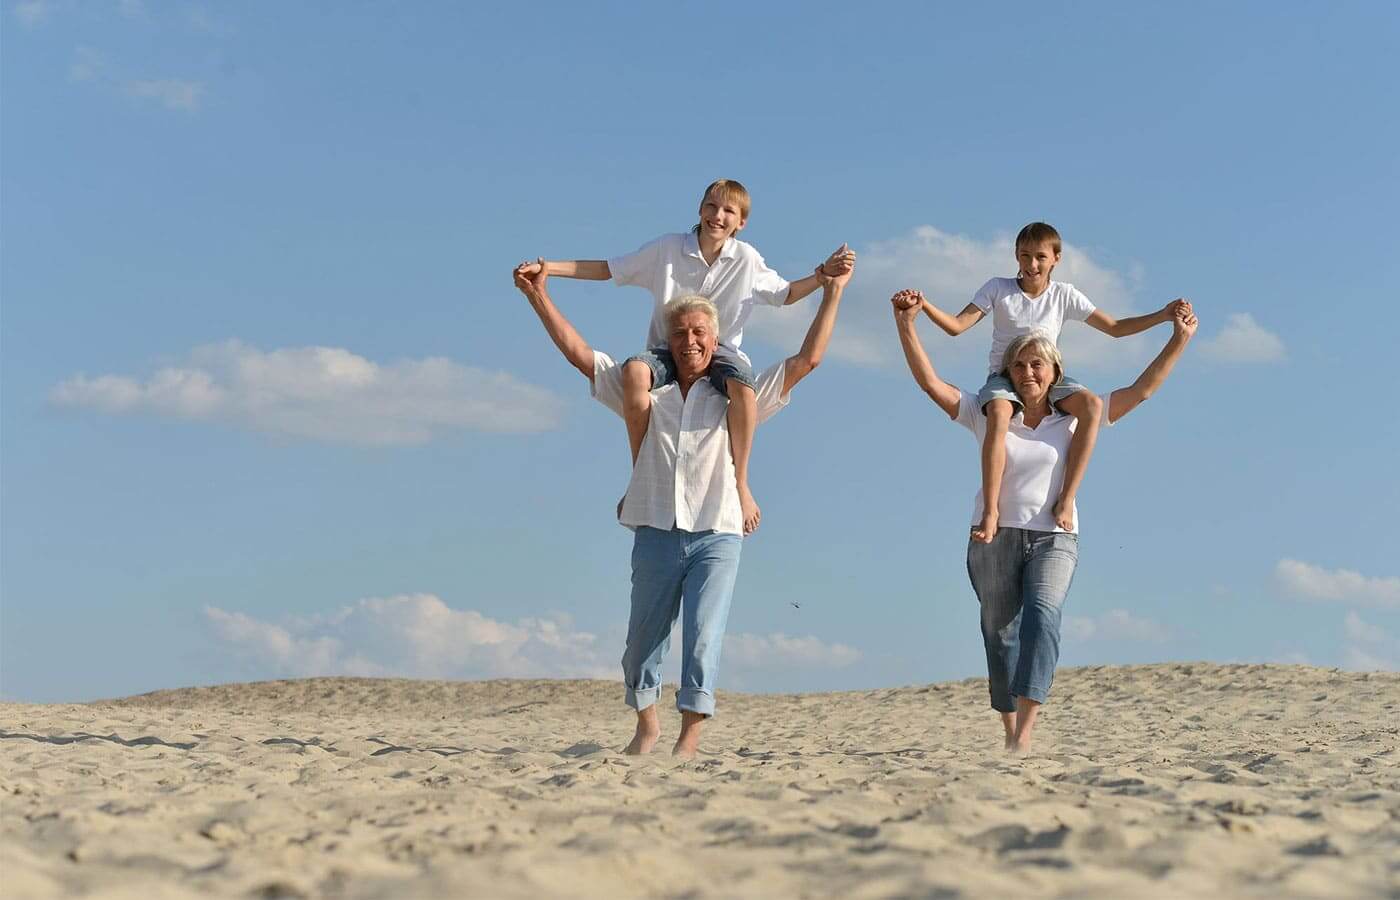 Grandparents carrying grandchildren on their shoulders on a sandy beach